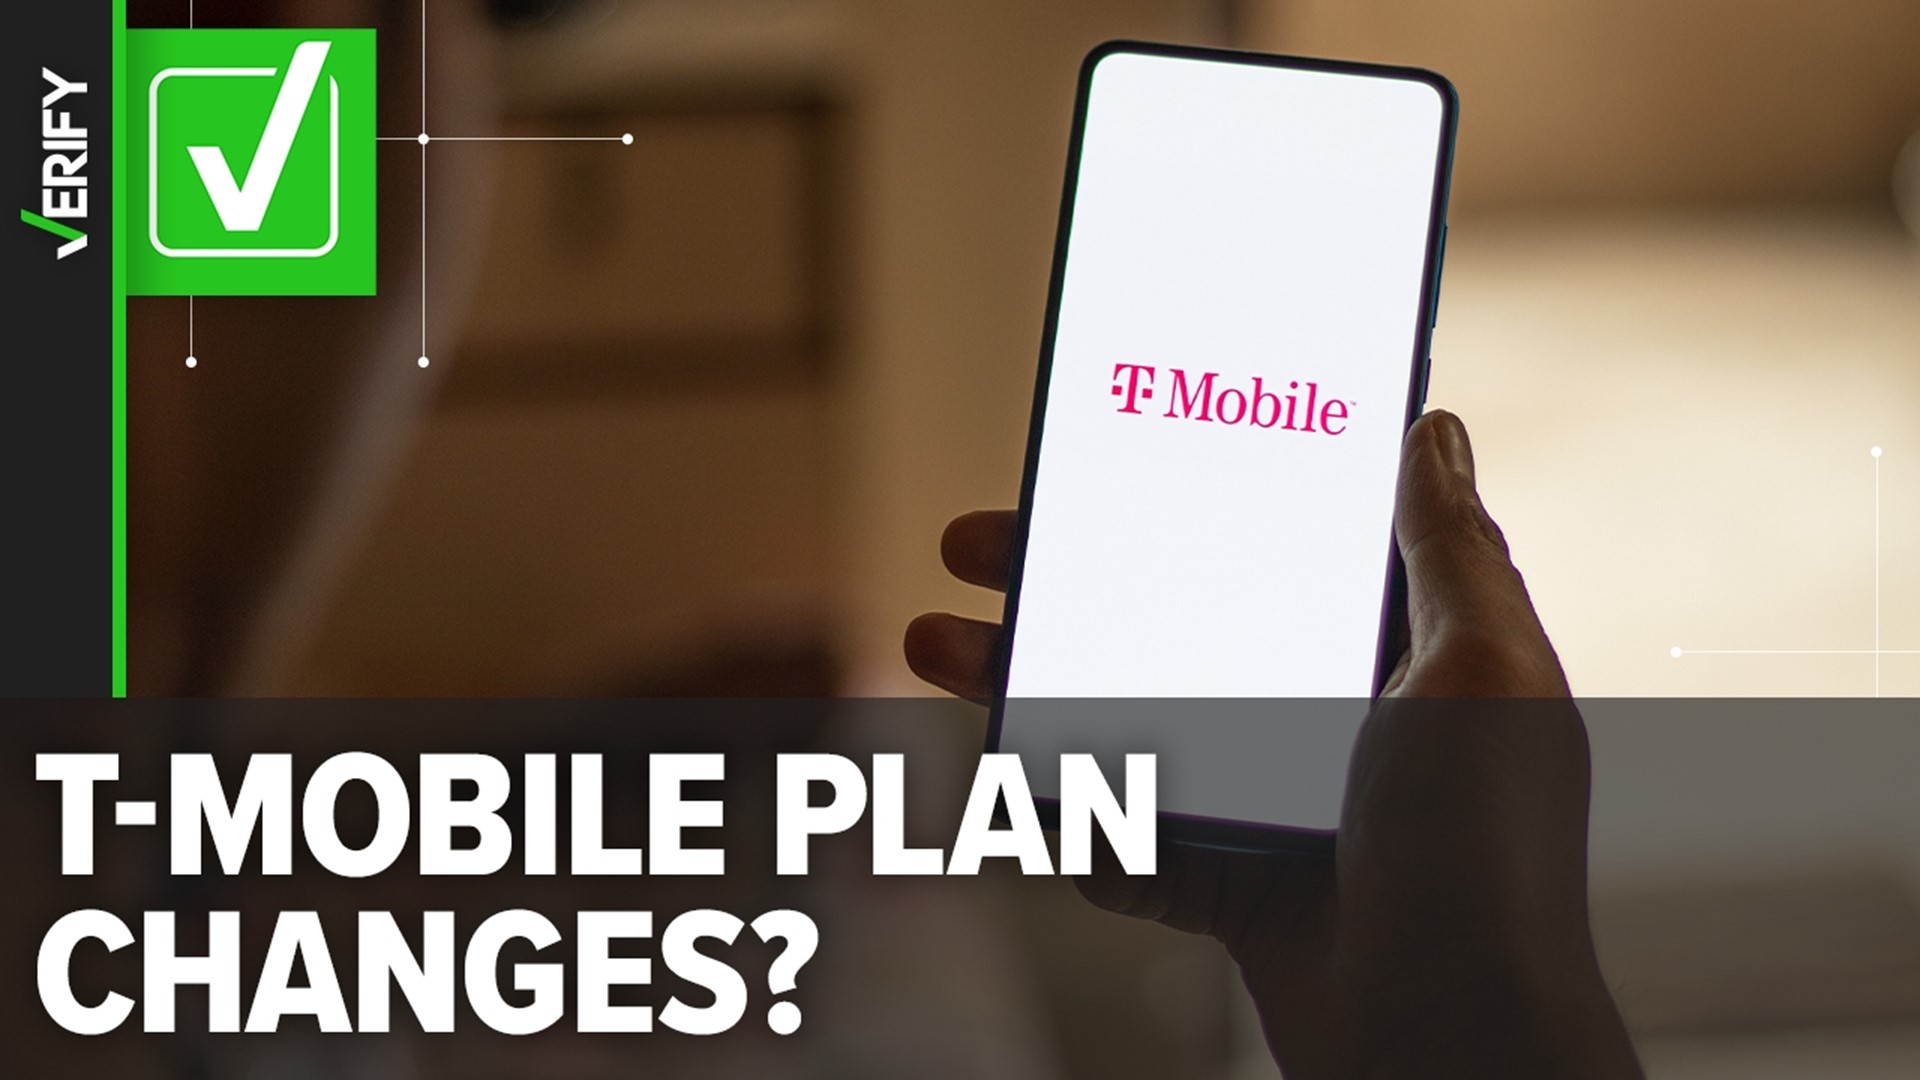 Some T-Mobile customers will get a text on Oct. 17 saying their current plans are changing with a choice to opt out. It’s not clear if prices will increase.